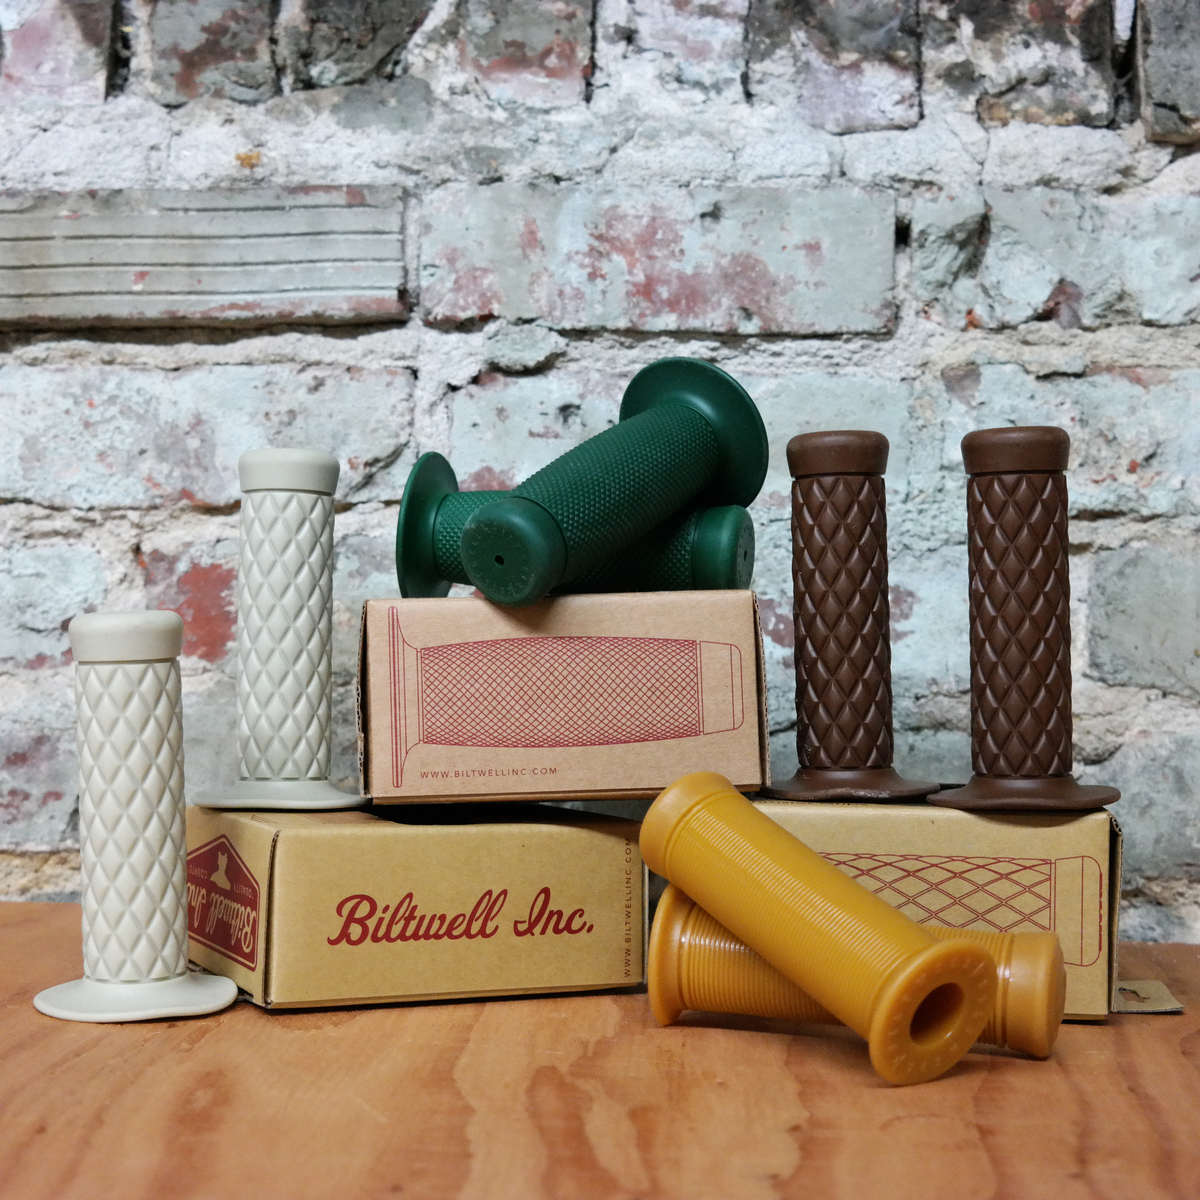 Boxes of Biltwell Inc. handle grips on a table next to a brick wall